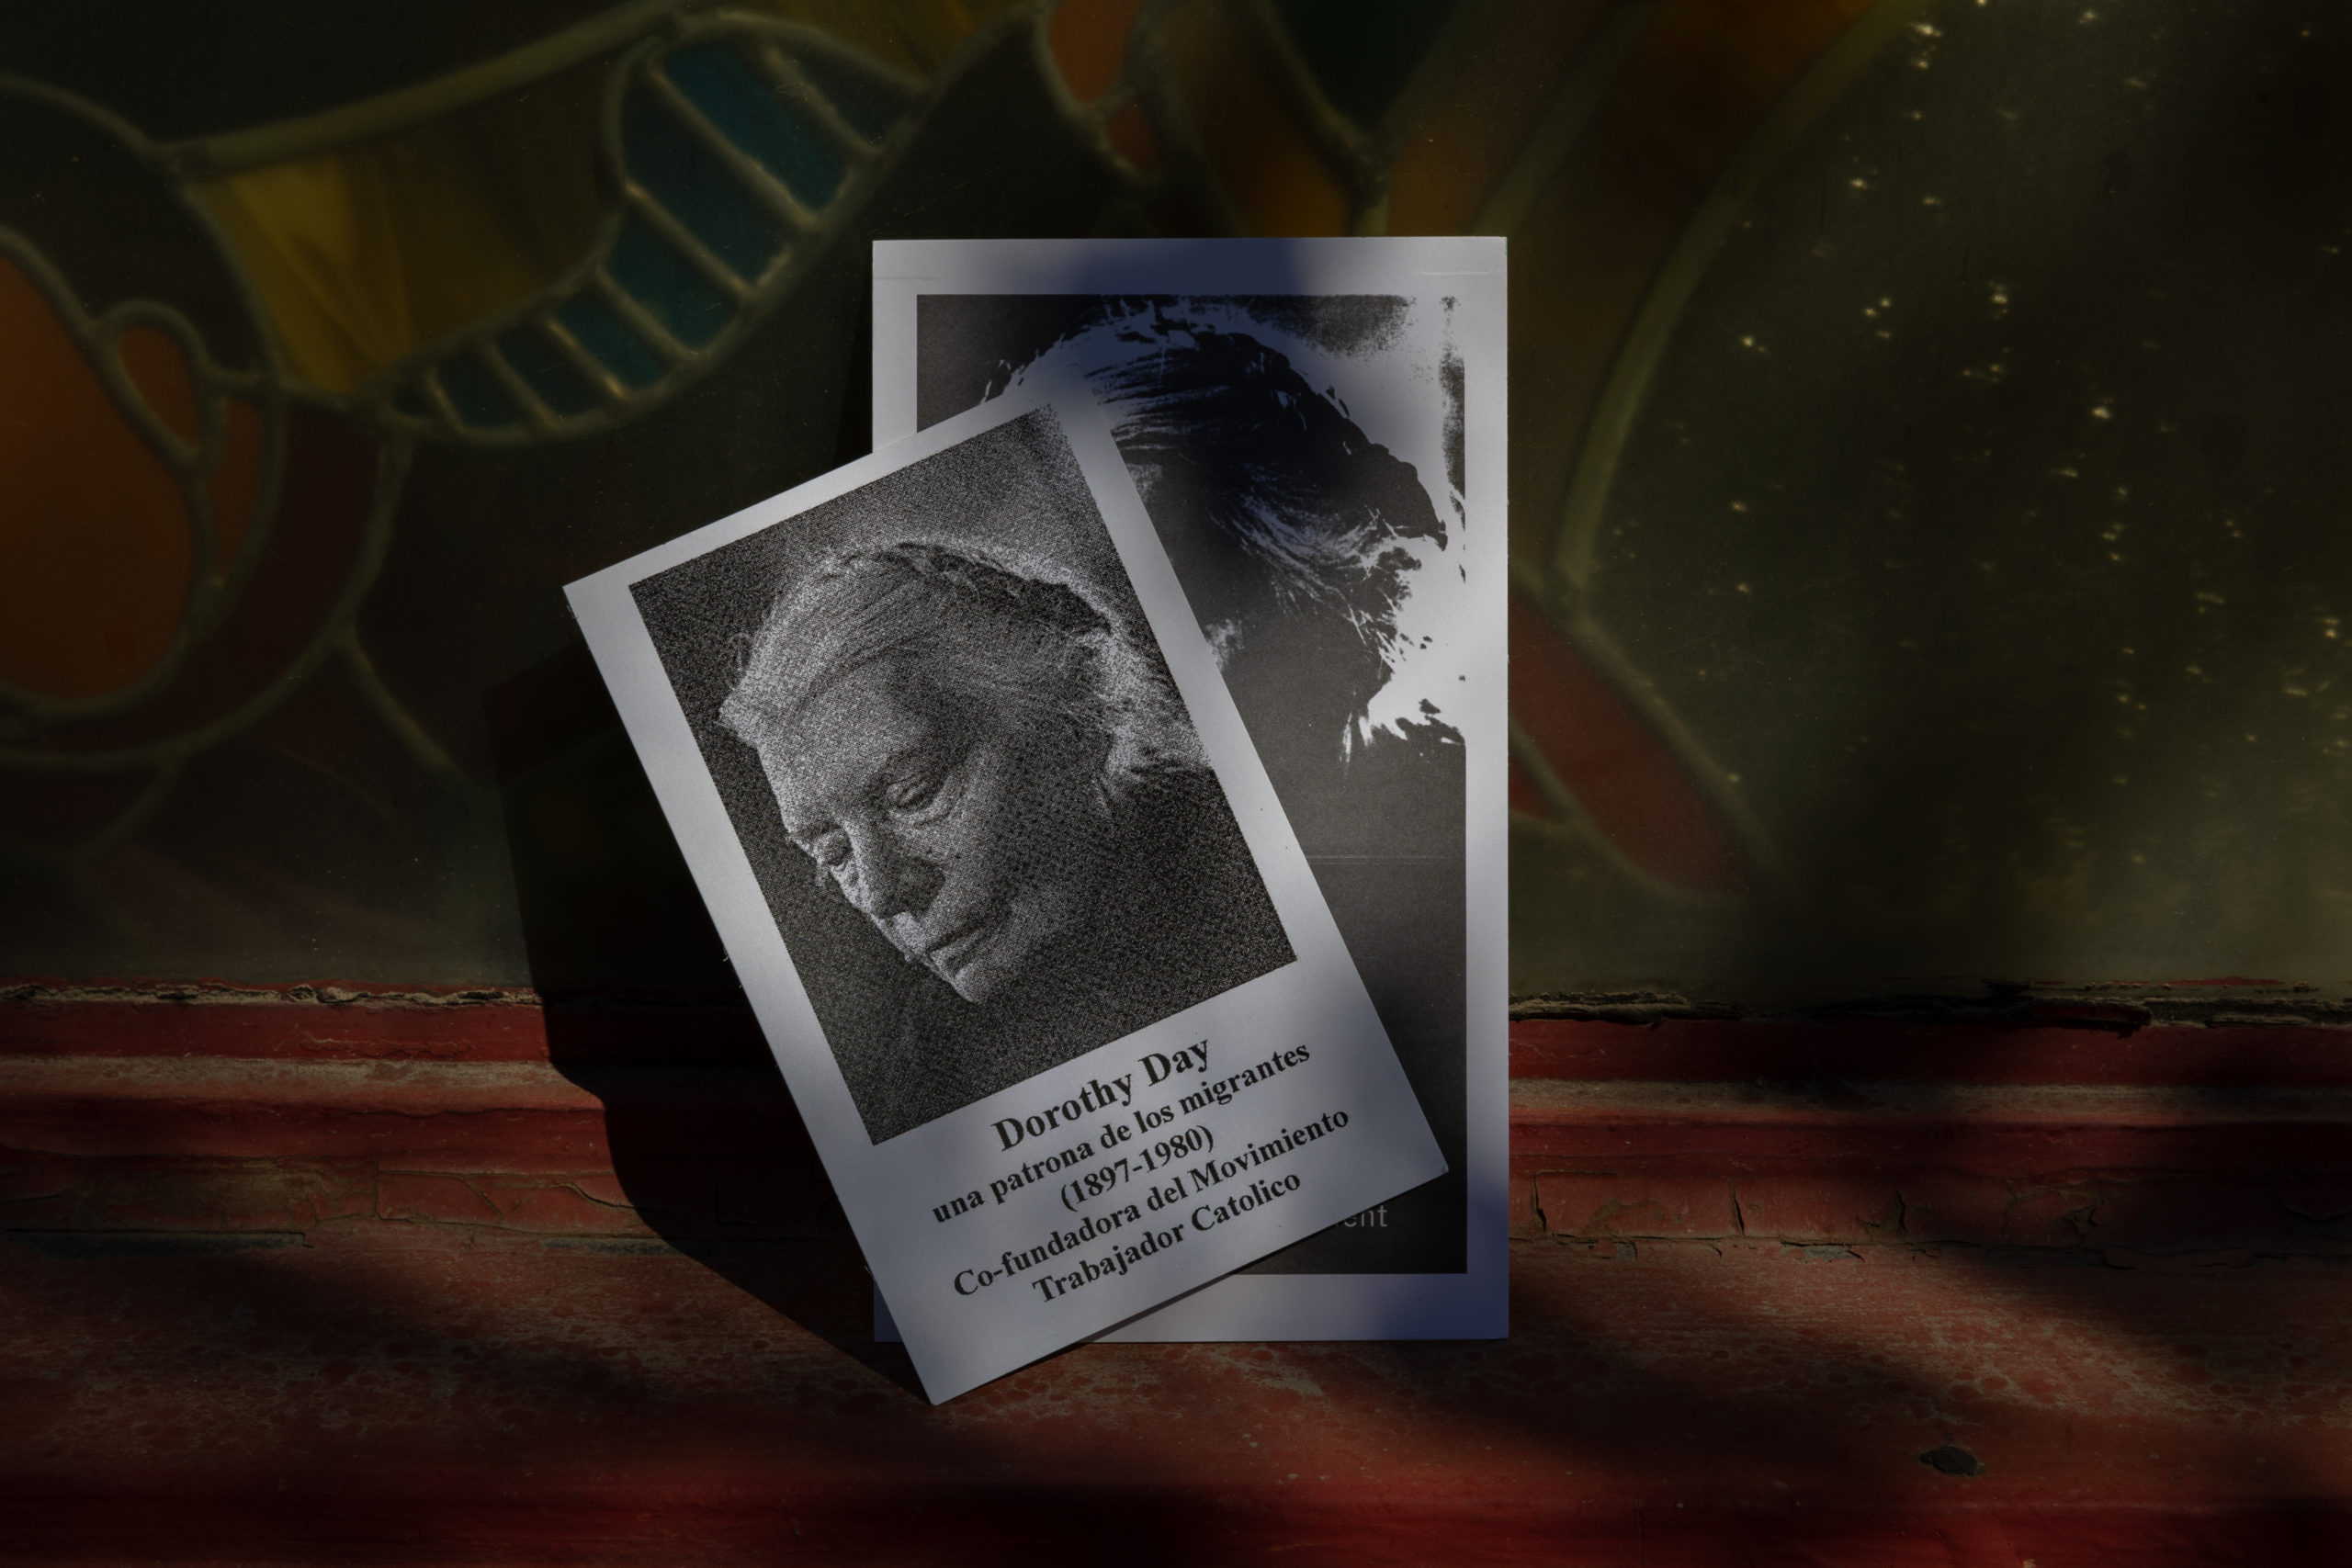 Images of Dorothy Day, one of the founders of the Catholic Worker movement, are printed on prayer cards at Casa Juan Diego.